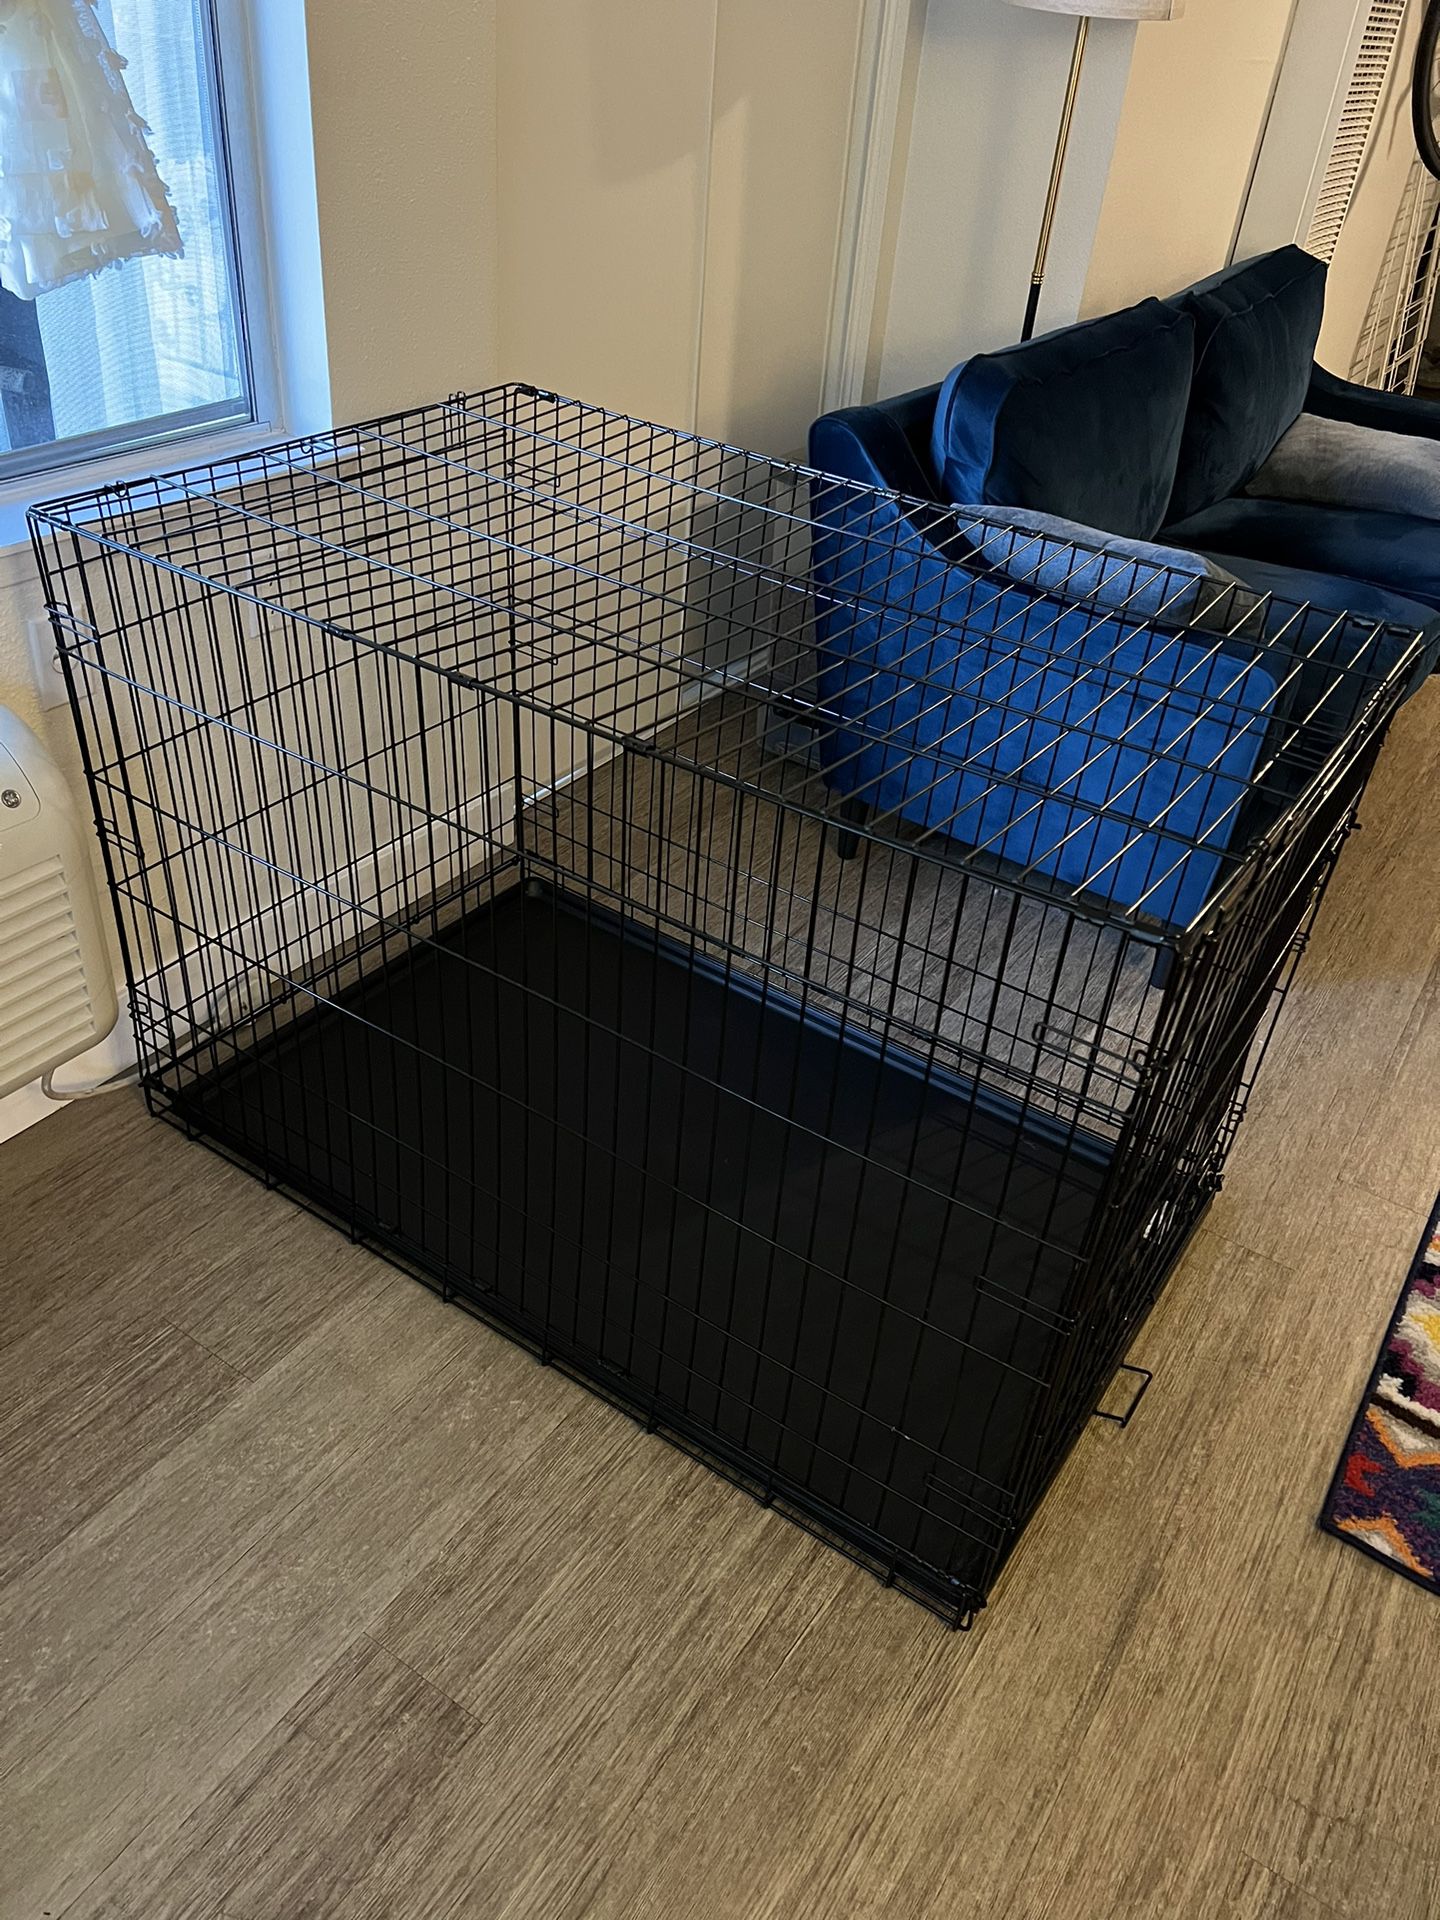 Large Dog Crate 48 Inches | Wireframe Pet Kennel